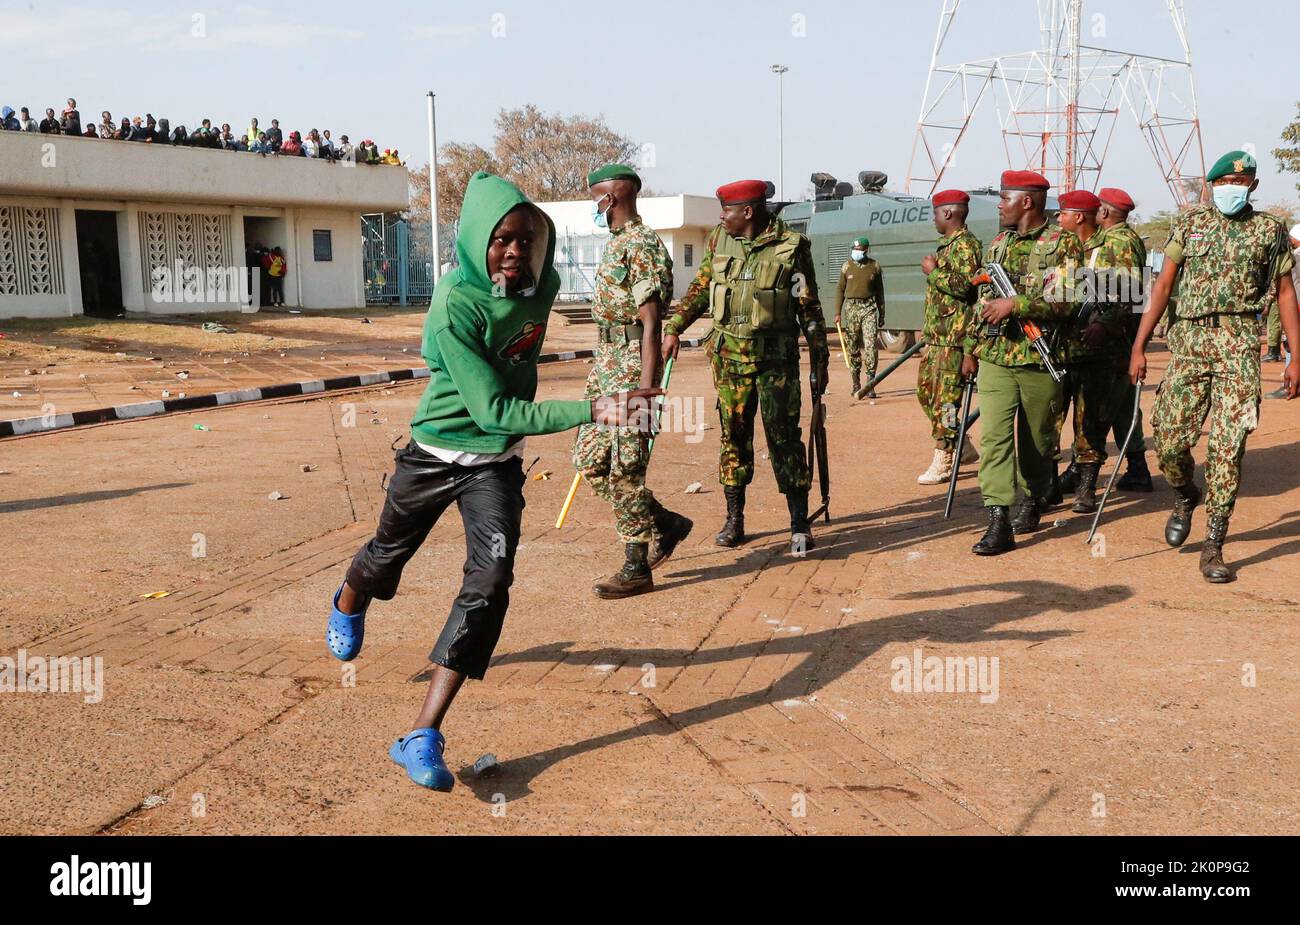 A boy runs past riot police as they attempt to control people jostling to attend the inauguration of Kenya's President William Ruto before his swearing-in ceremony at the Moi International Stadium Kasarani, in Nairobi, Kenya September 13, 2022. REUTERS/Thomas Mukoya Stock Photo